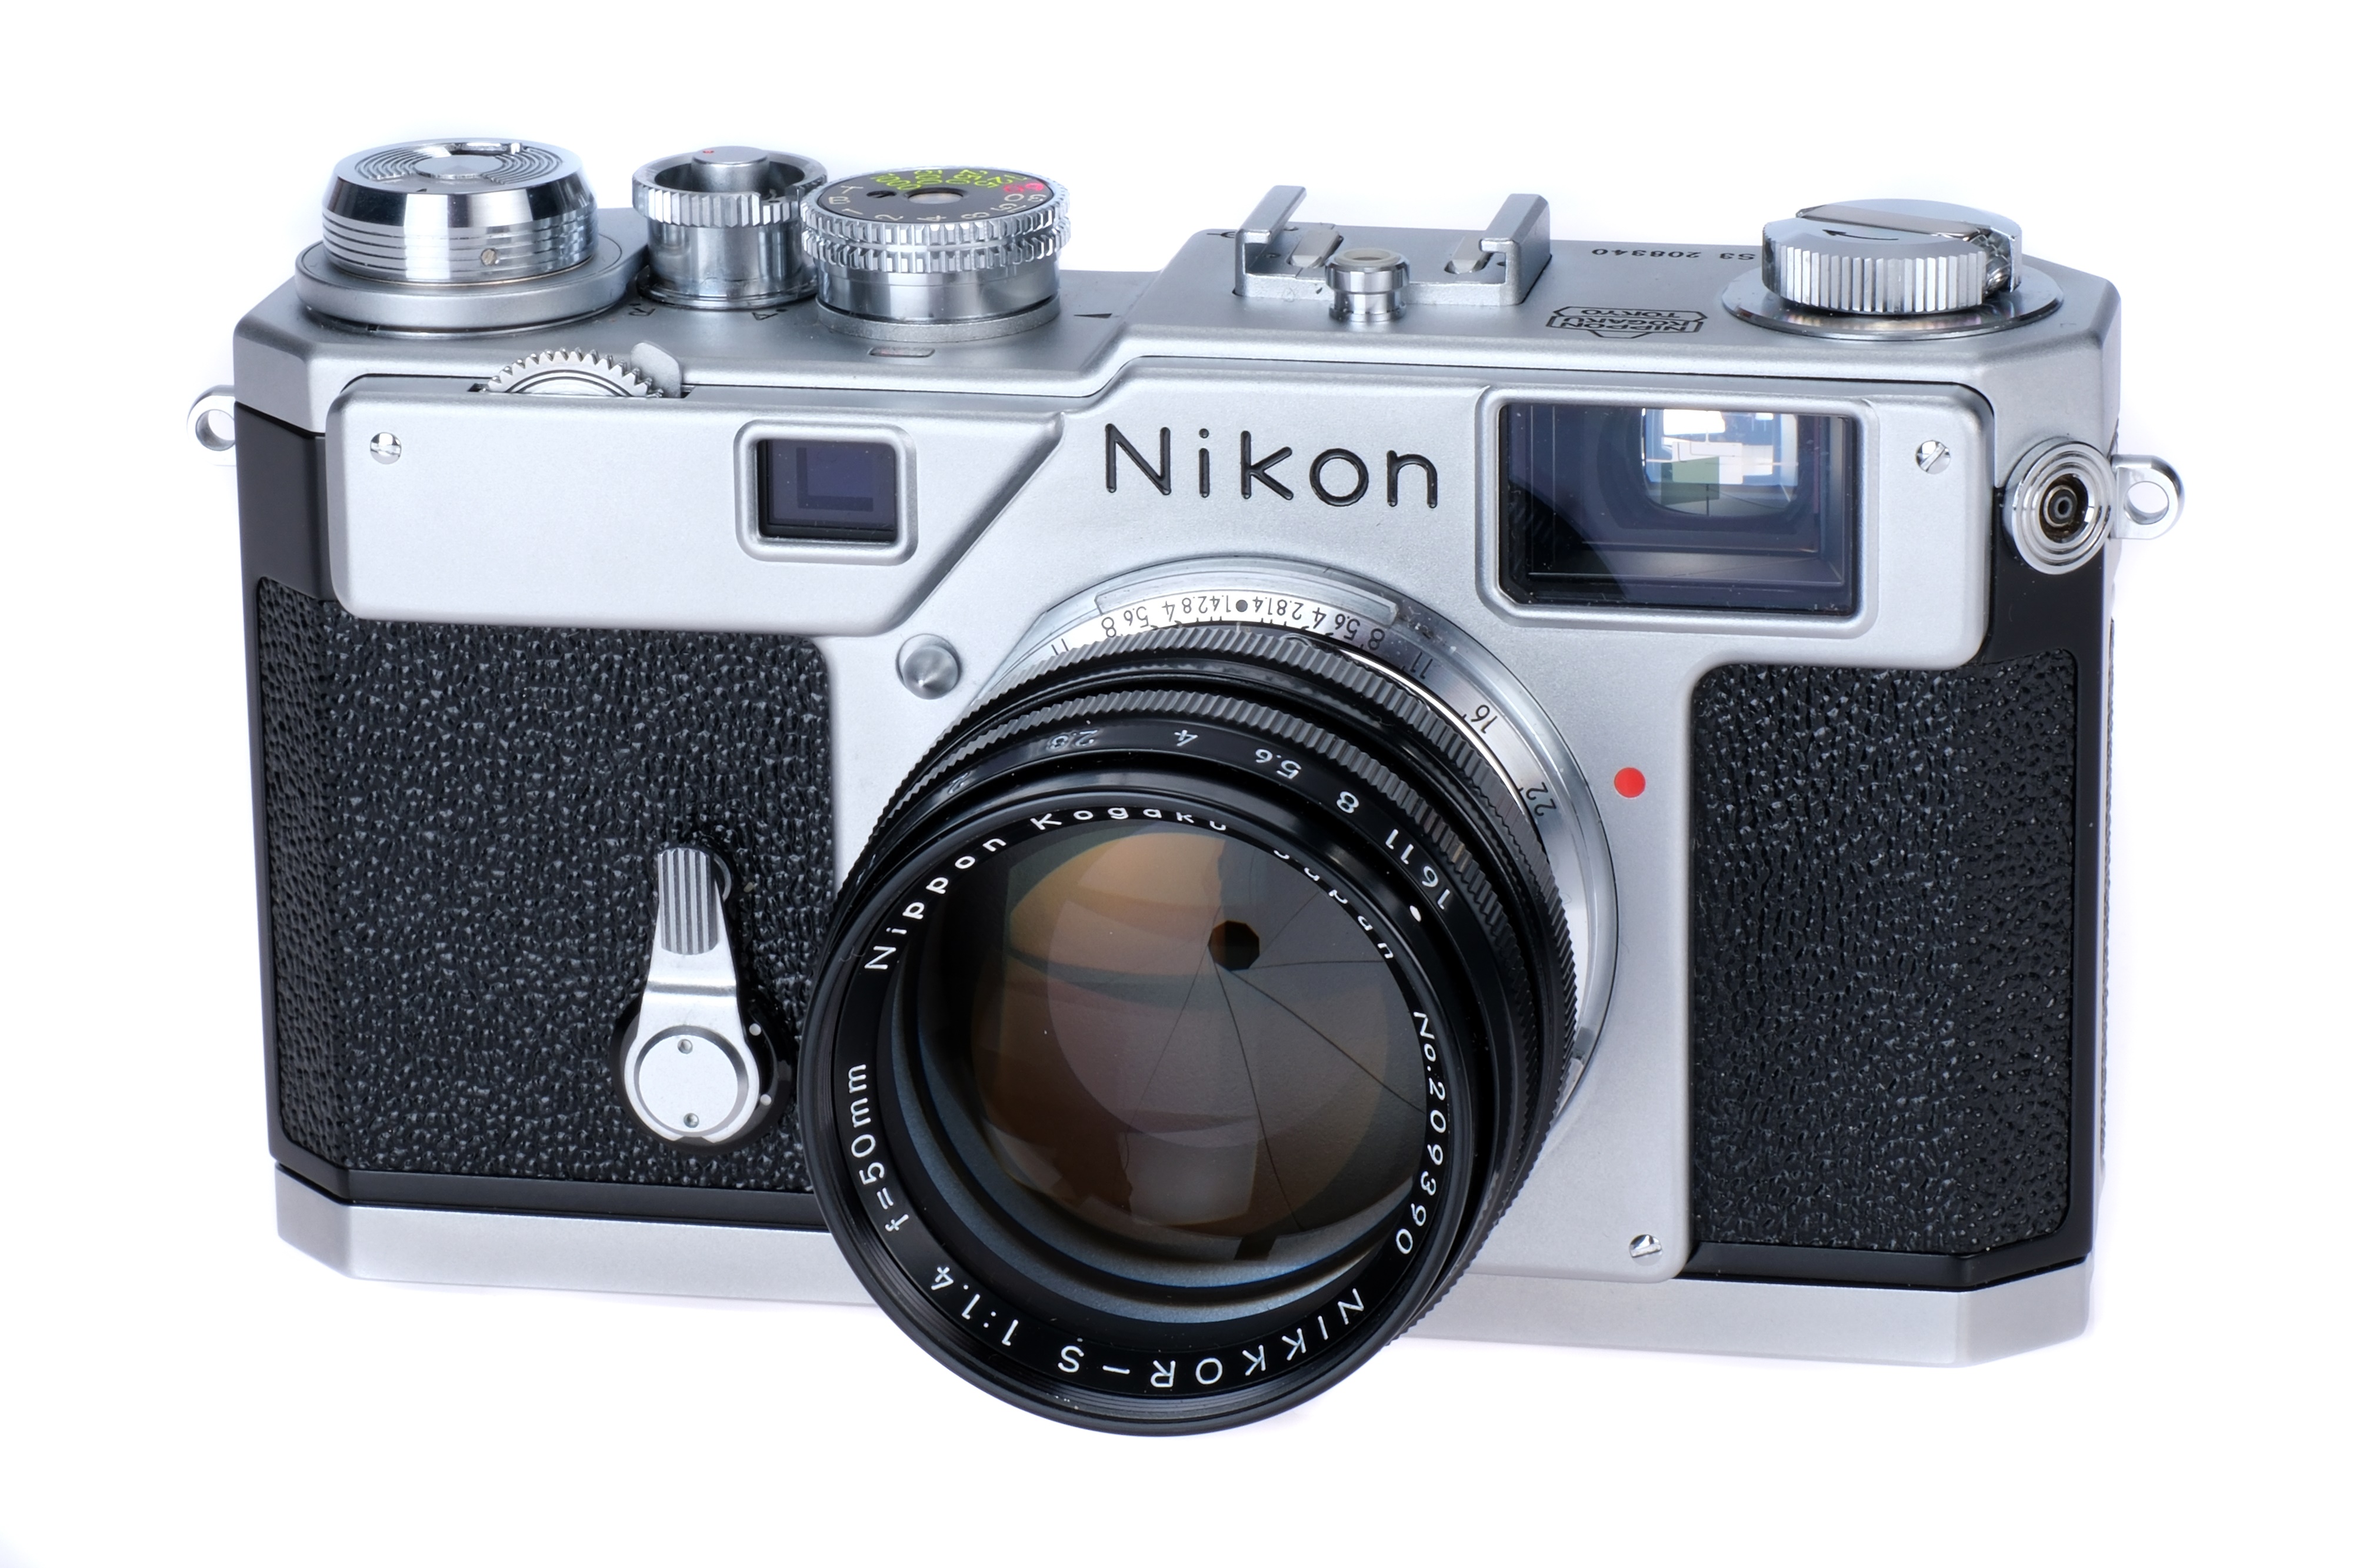 A Nikon S3 Year 2000 Limited Edition Rangefinder Camera, - Image 2 of 6